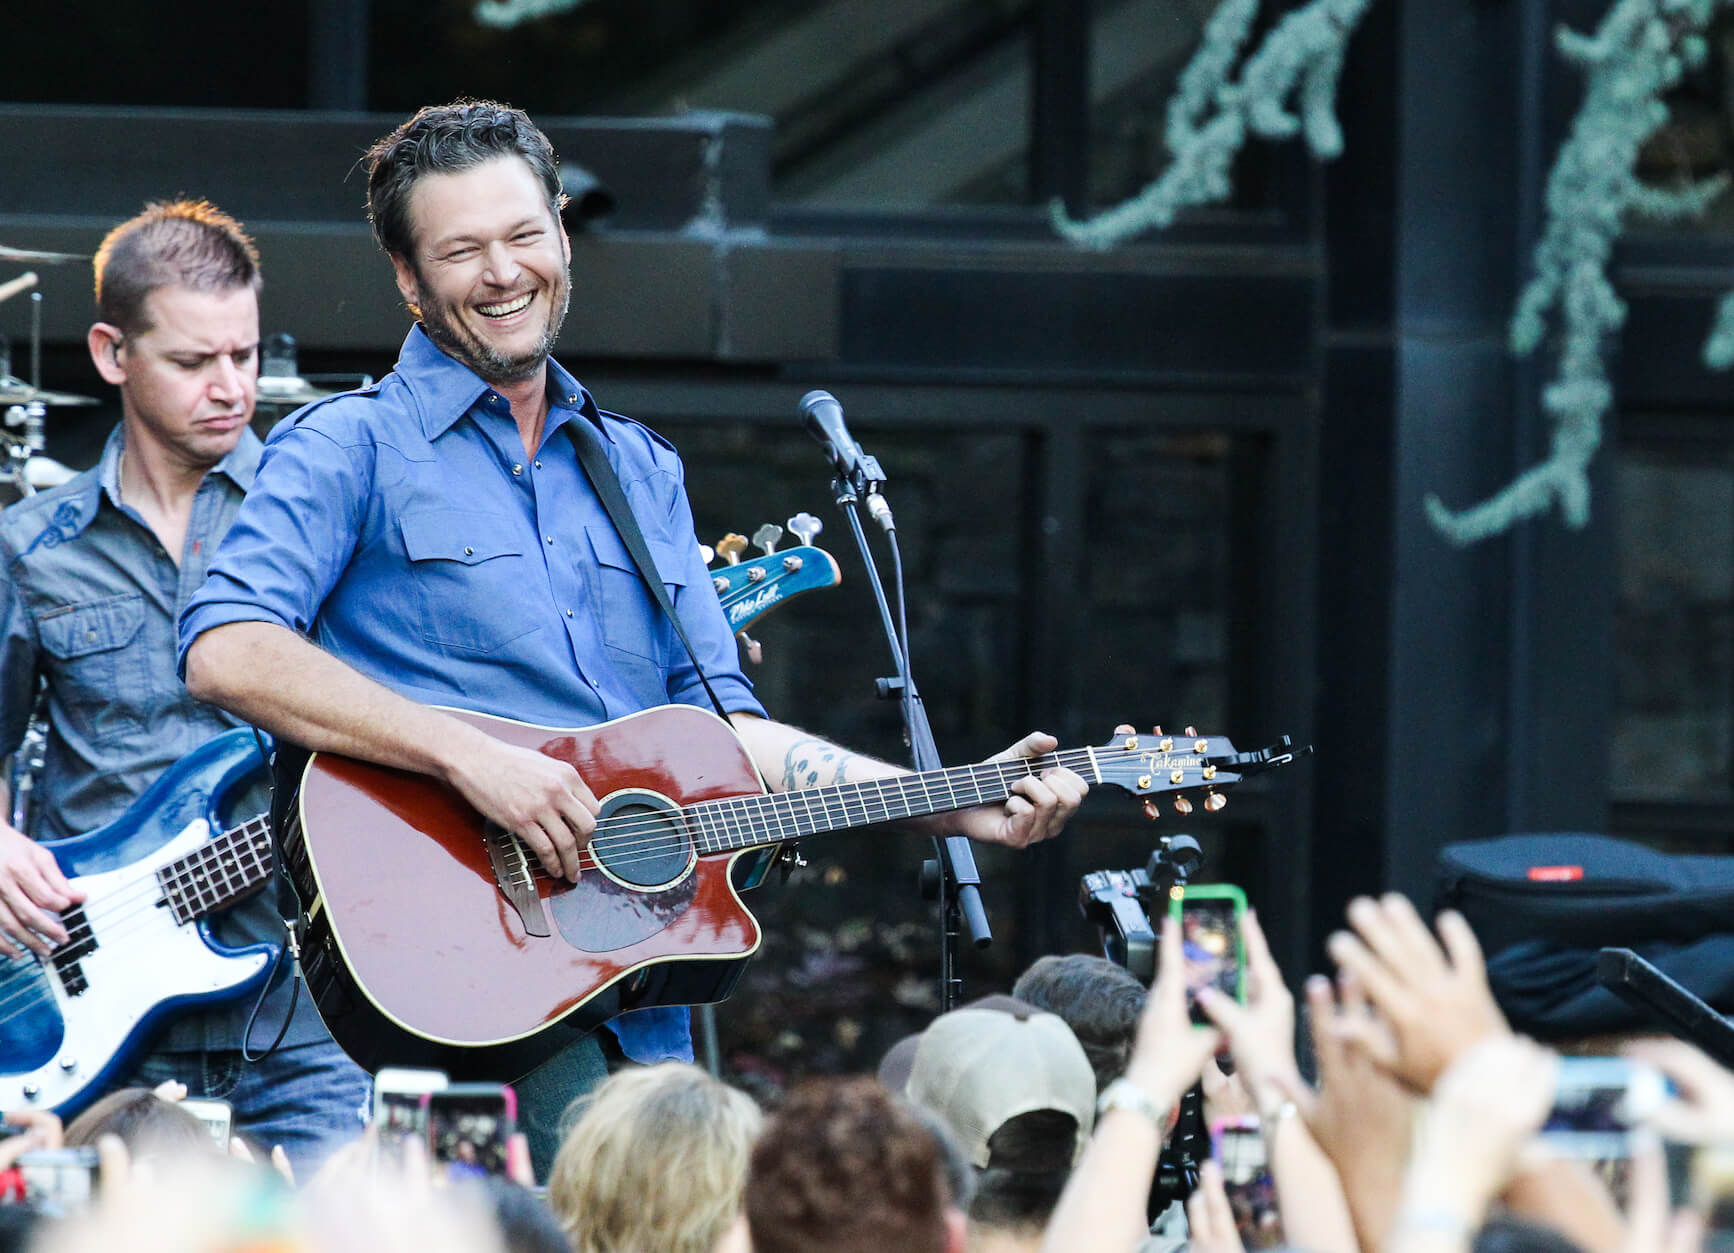 Blake Shelton holding a guitar in front of a crowd and smiling